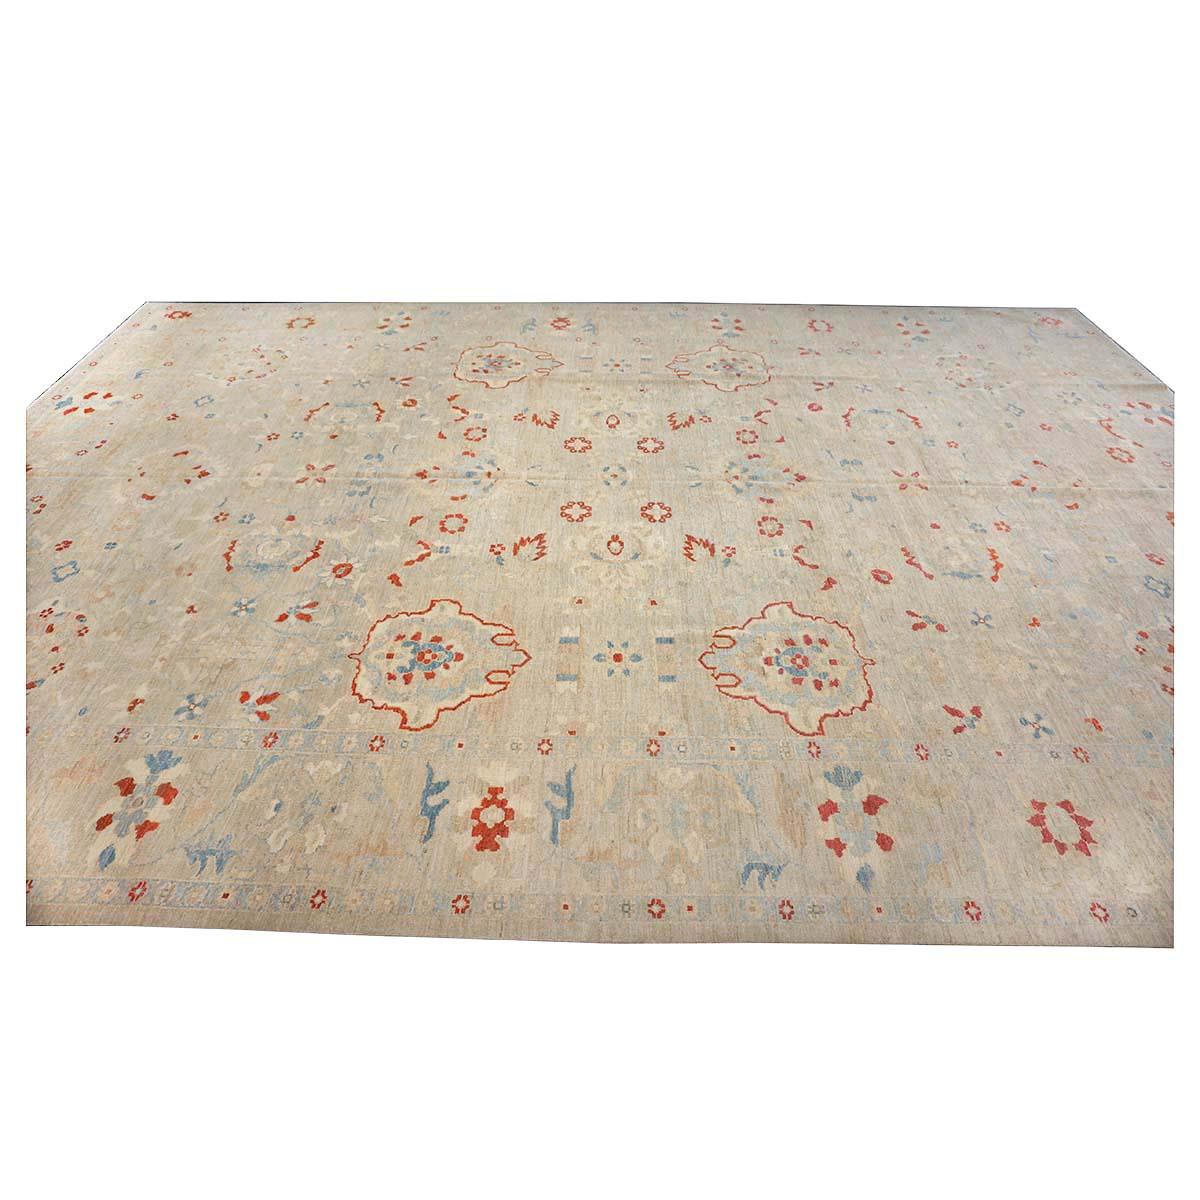 Contemporary 21st Century Sultanabad Master 12x17 Ivory, Red, & Blue Handmade Area Rug For Sale